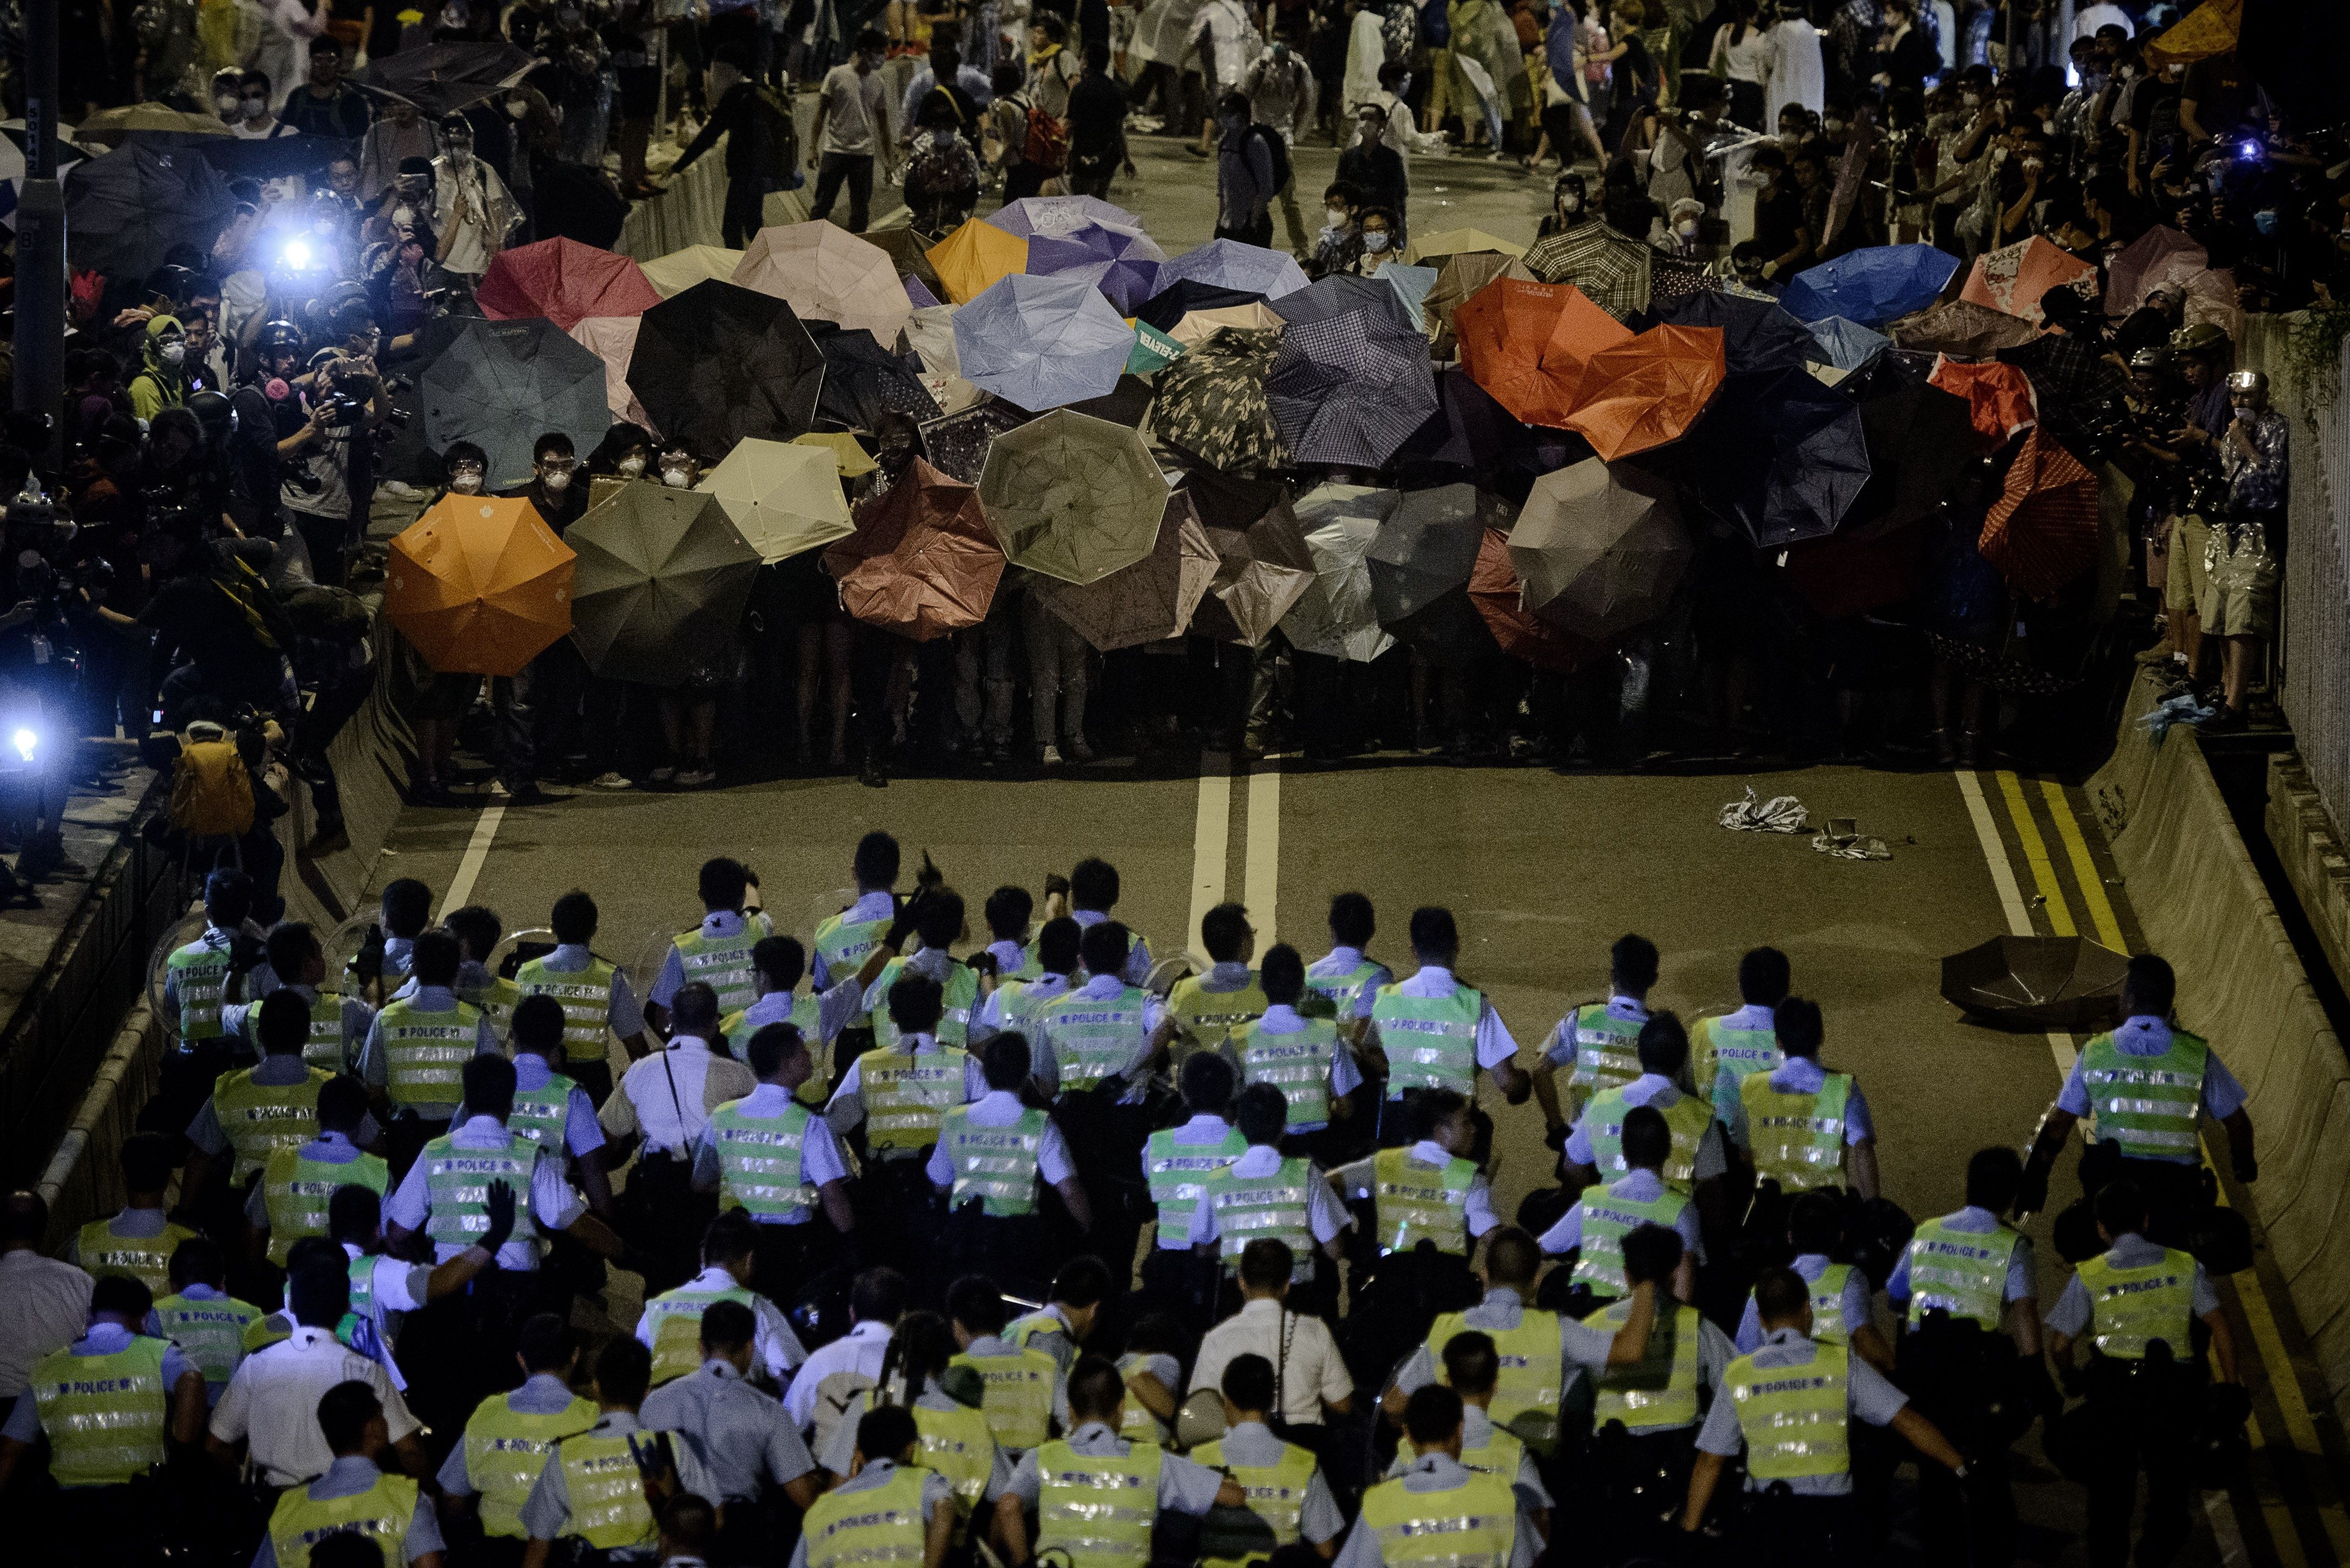 Hong Kong protesters dig in over election reforms